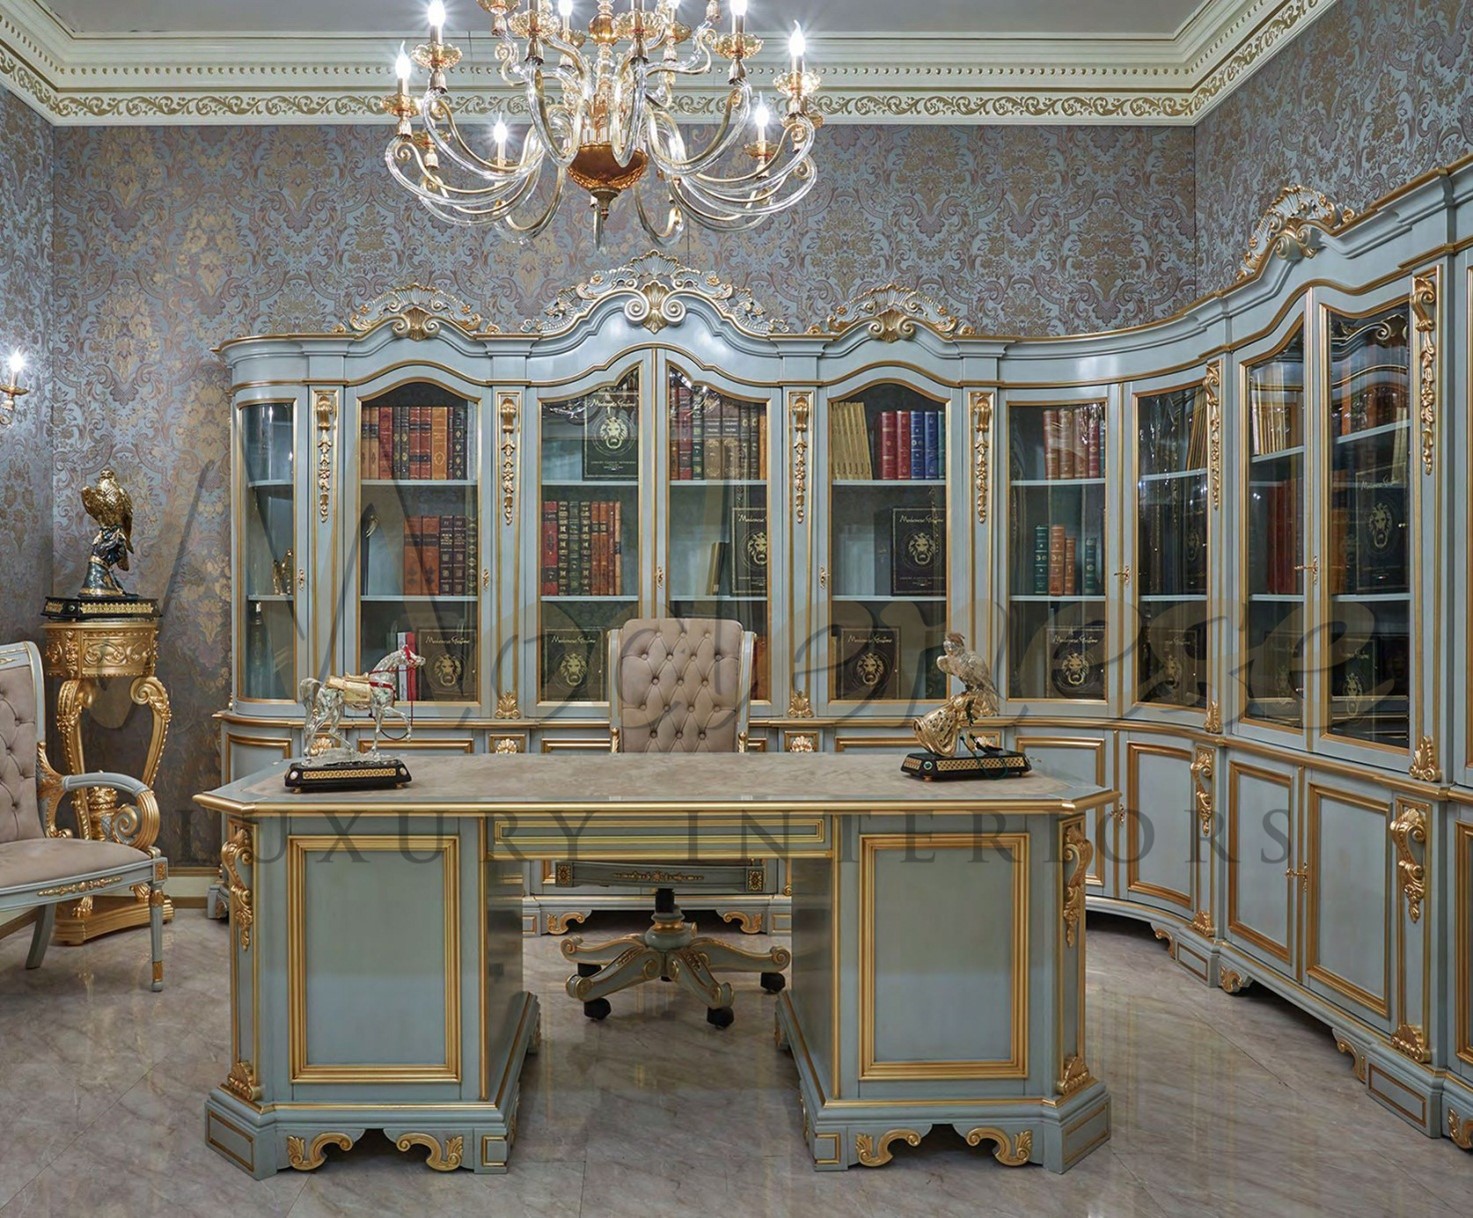 DESIGN OF A LUXURIOUS PERSONAL HOME OFFICE